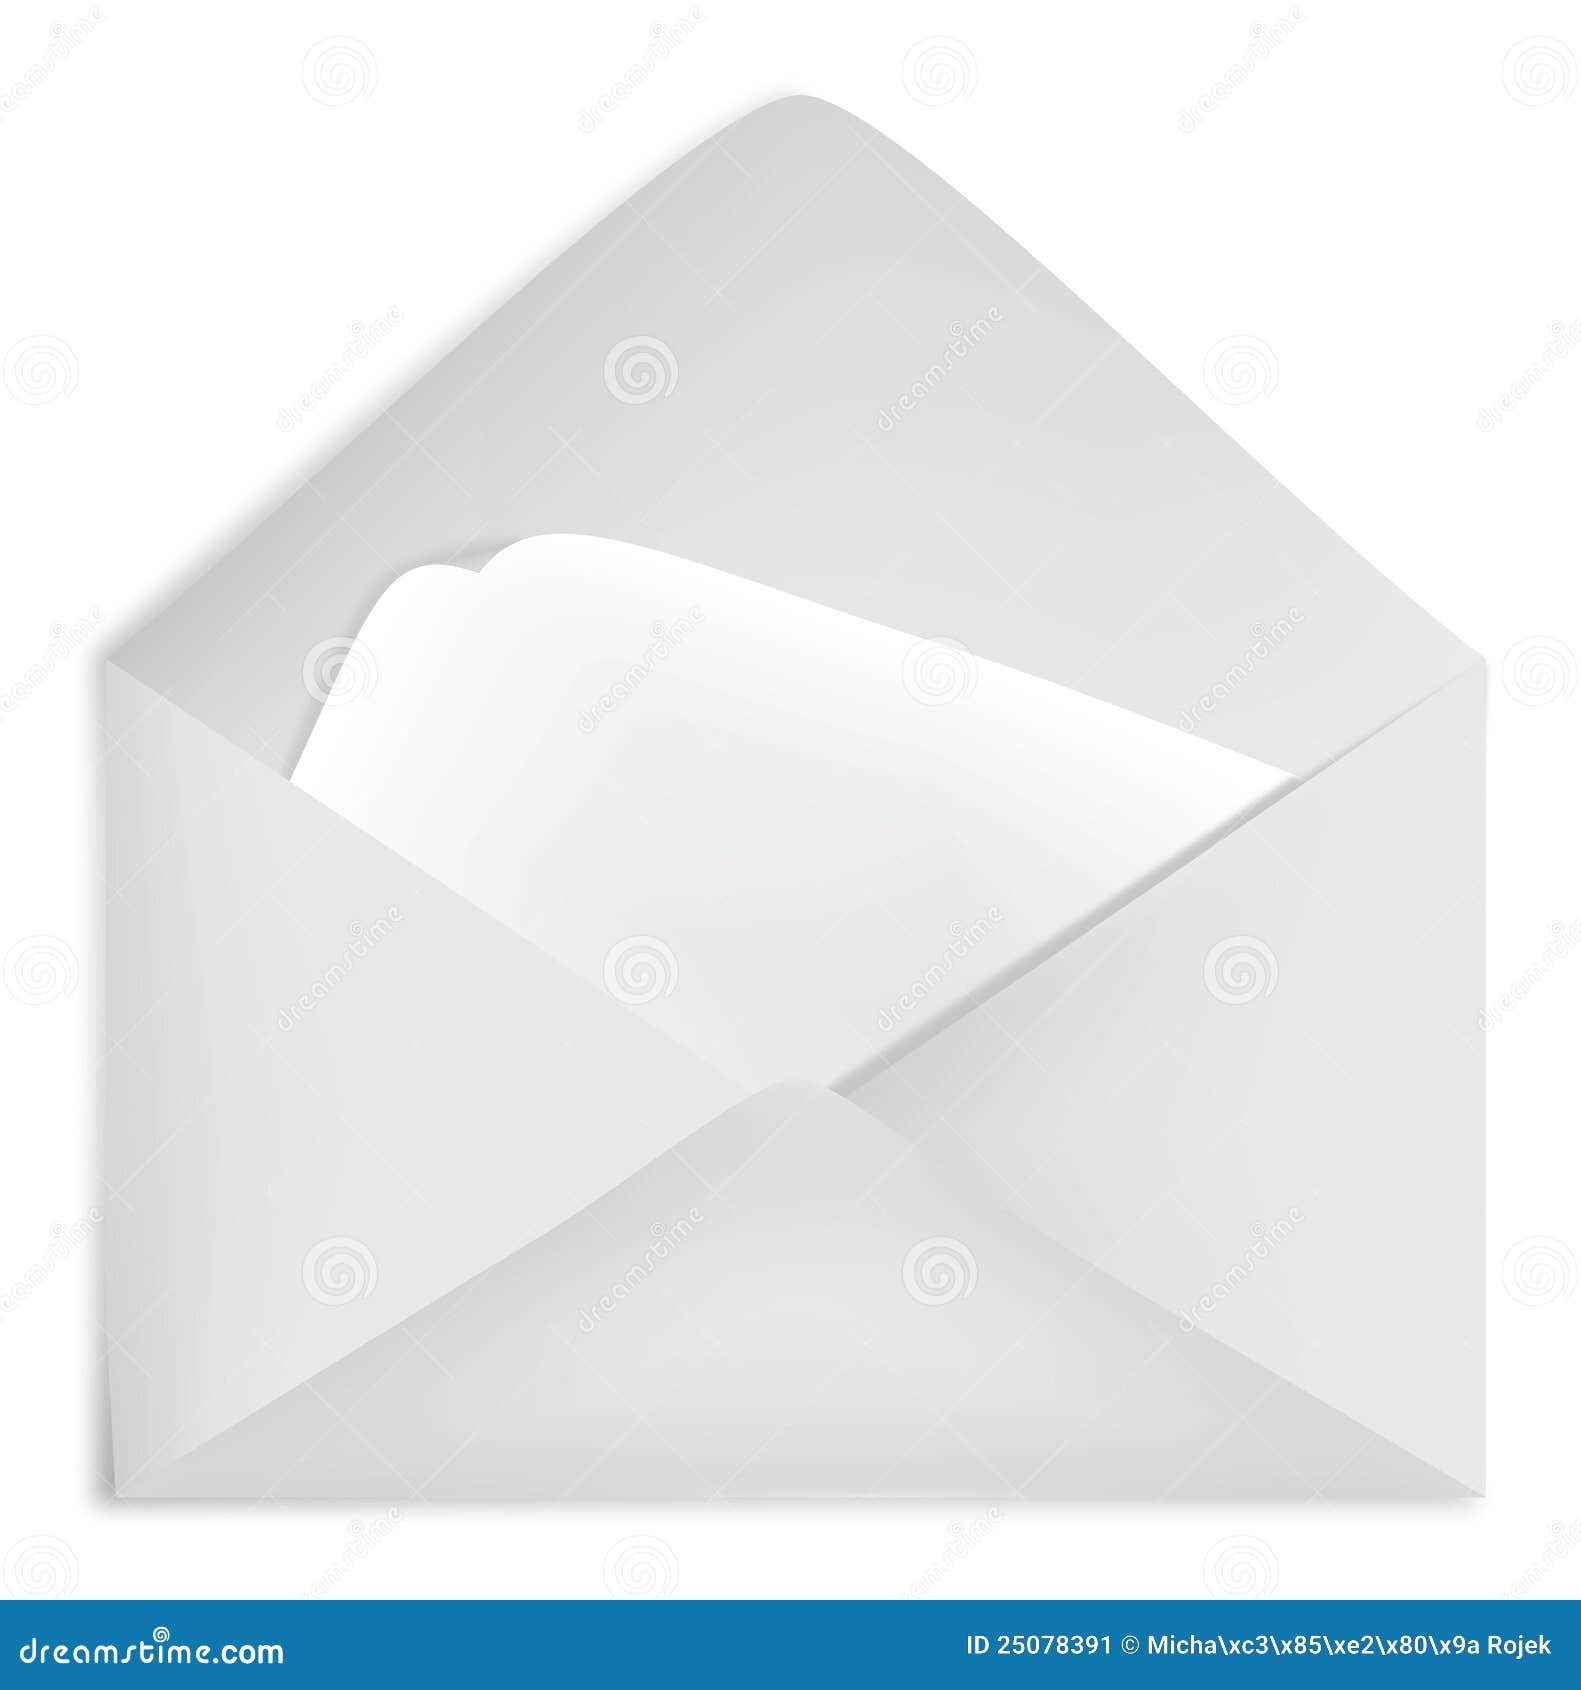 envelope with a letter, email